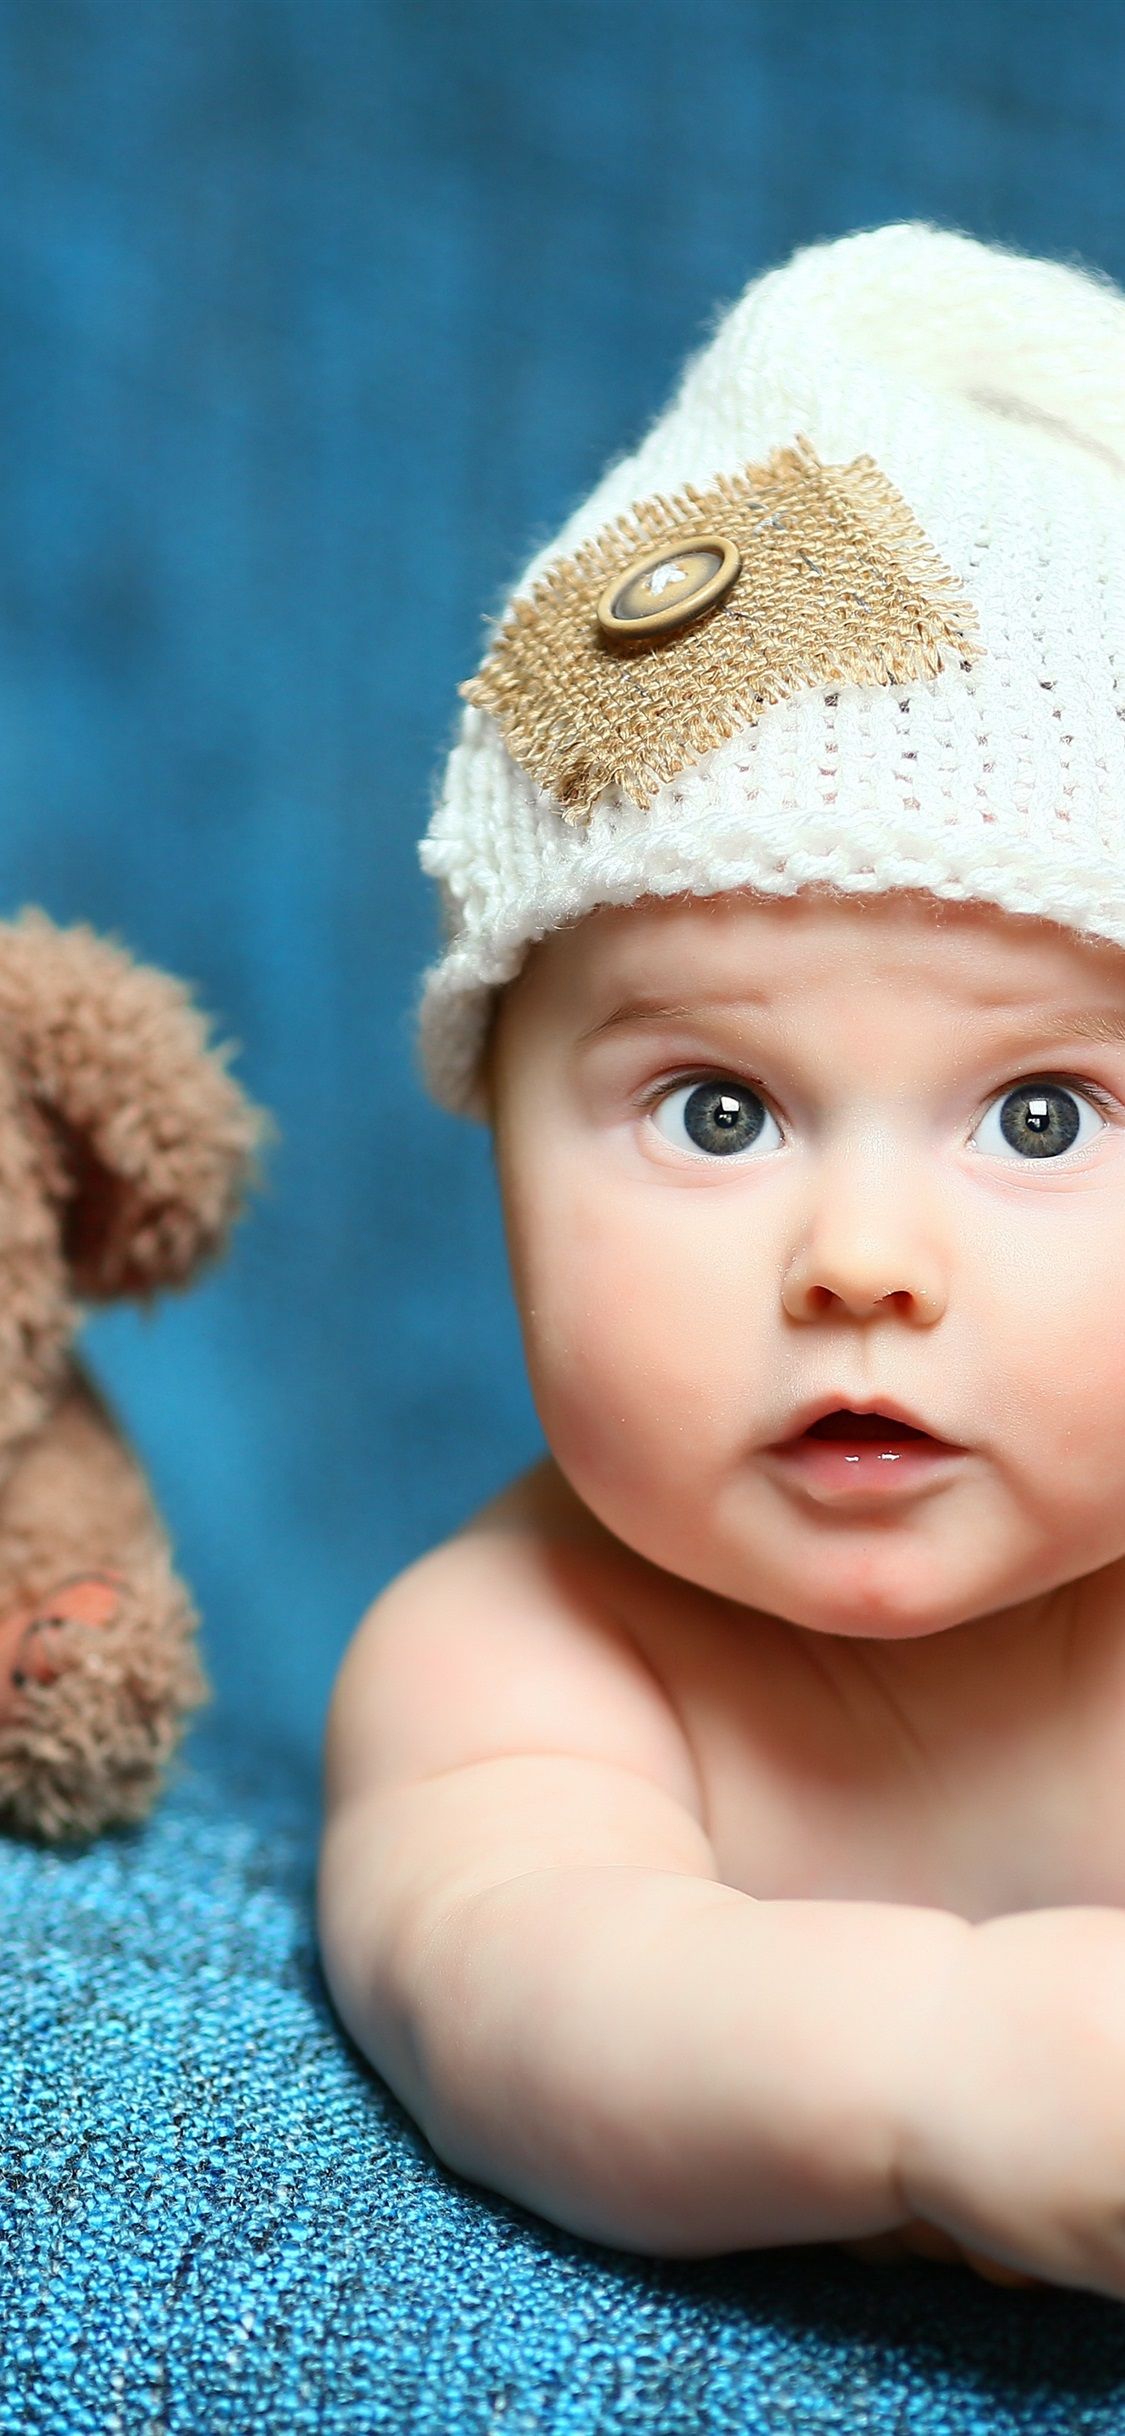 Cute Baby And Toy Bear 1125x2436 IPhone 11 Pro XS X Wallpaper, Background, Picture, Image